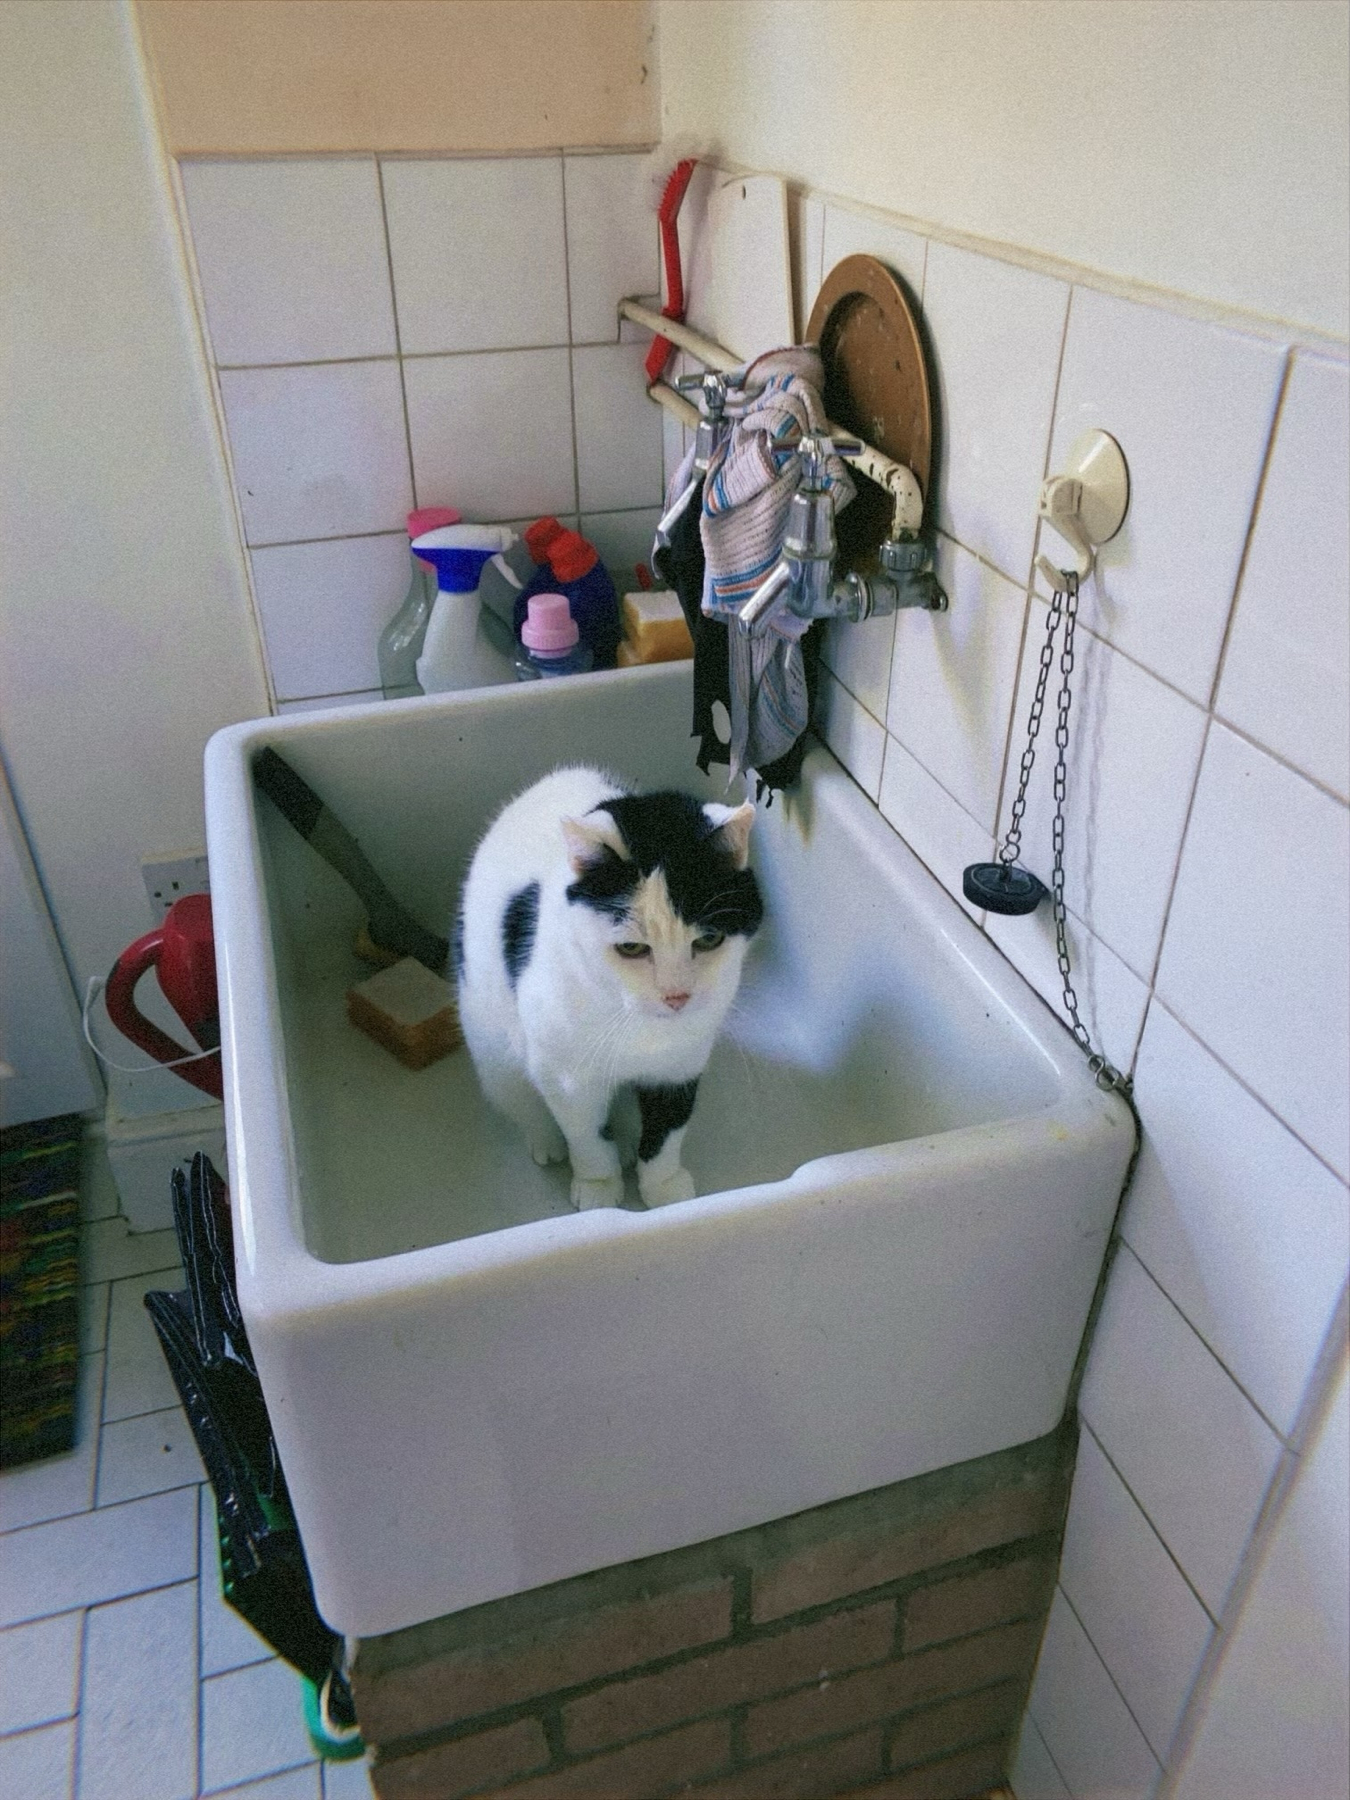 A black and white cat standing inside a utility sink in a kitchen setting, with cleaning supplies and a dish brush to the side.